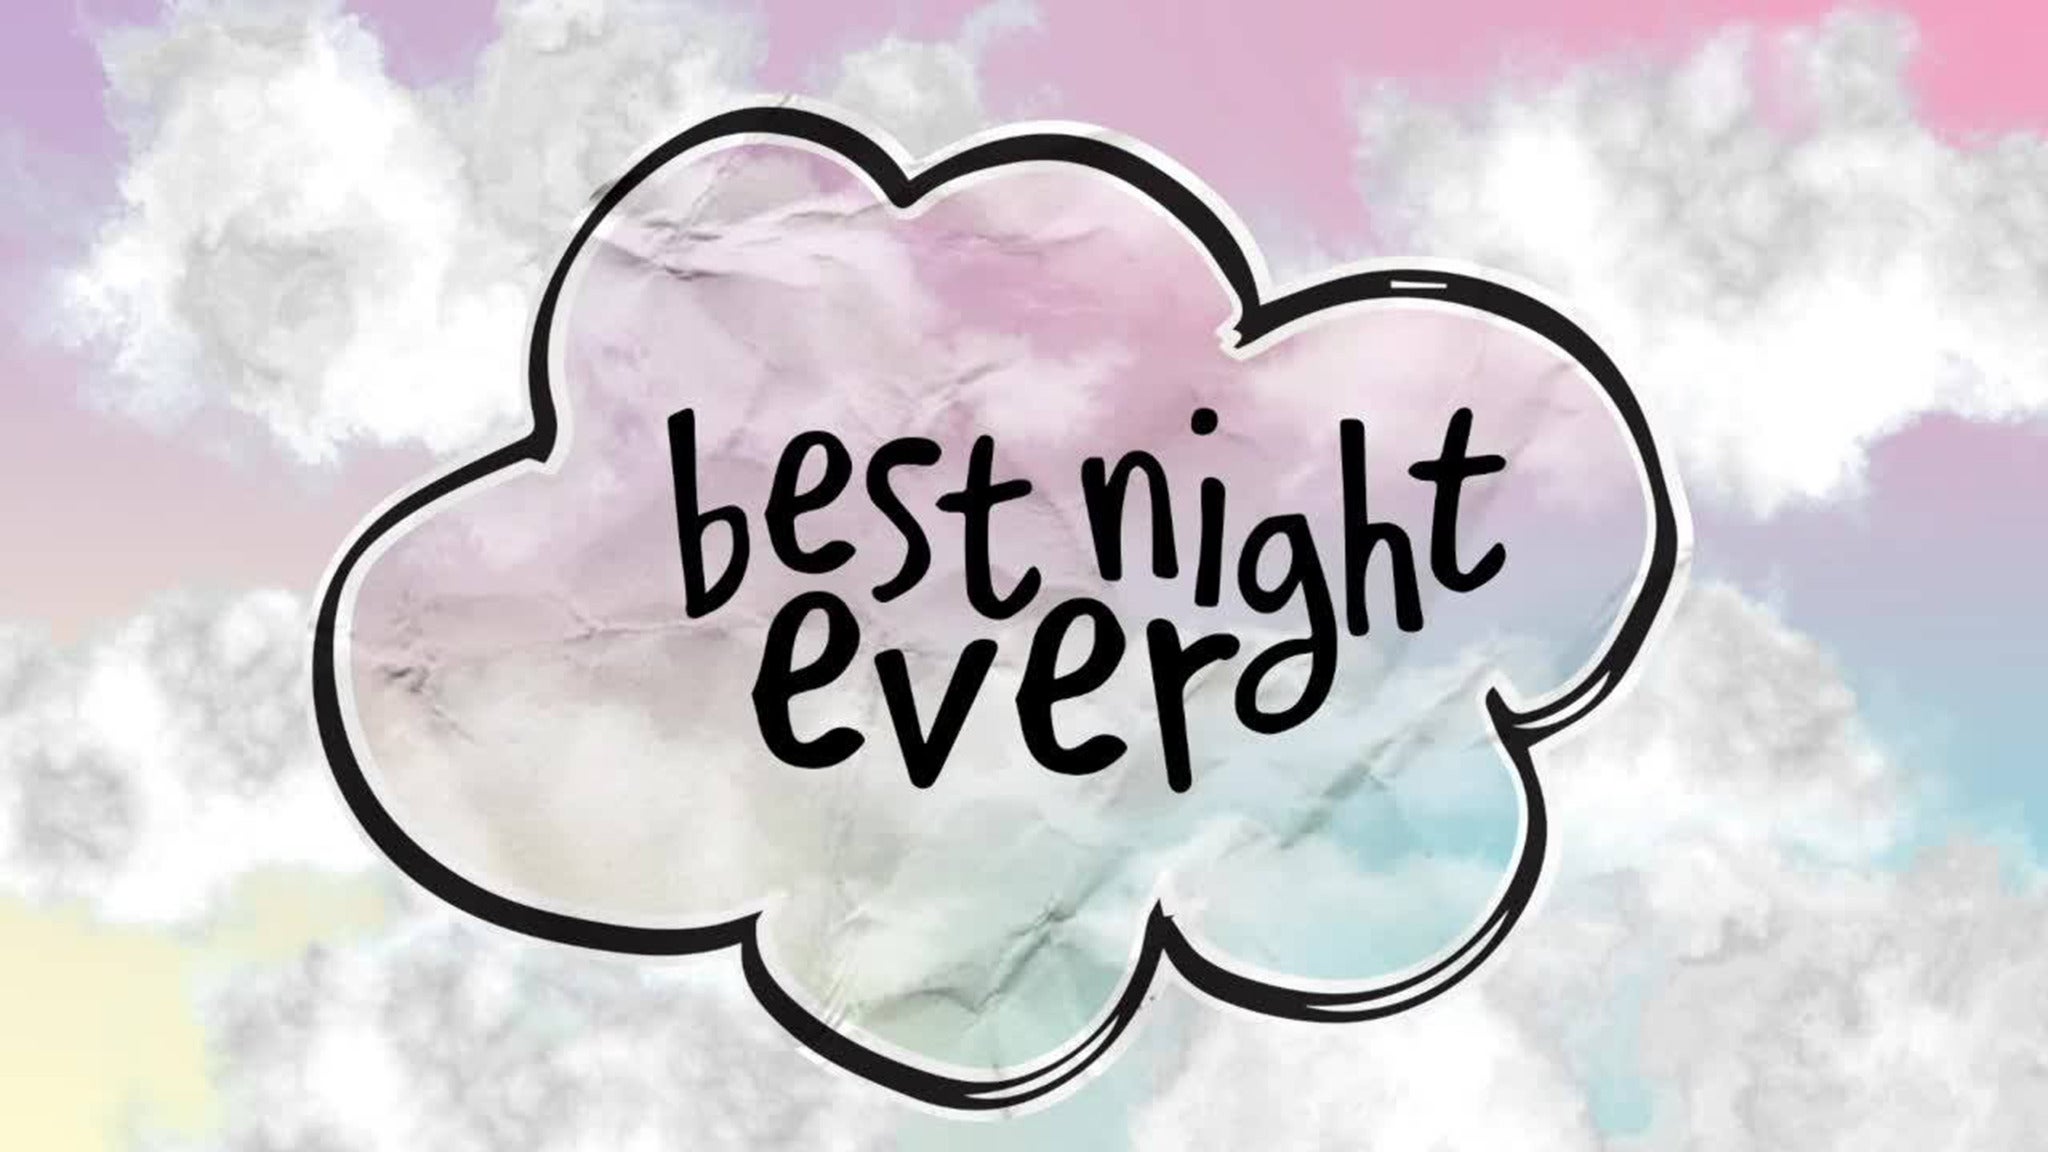 Best Night Ever Party: Best of Both Worlds